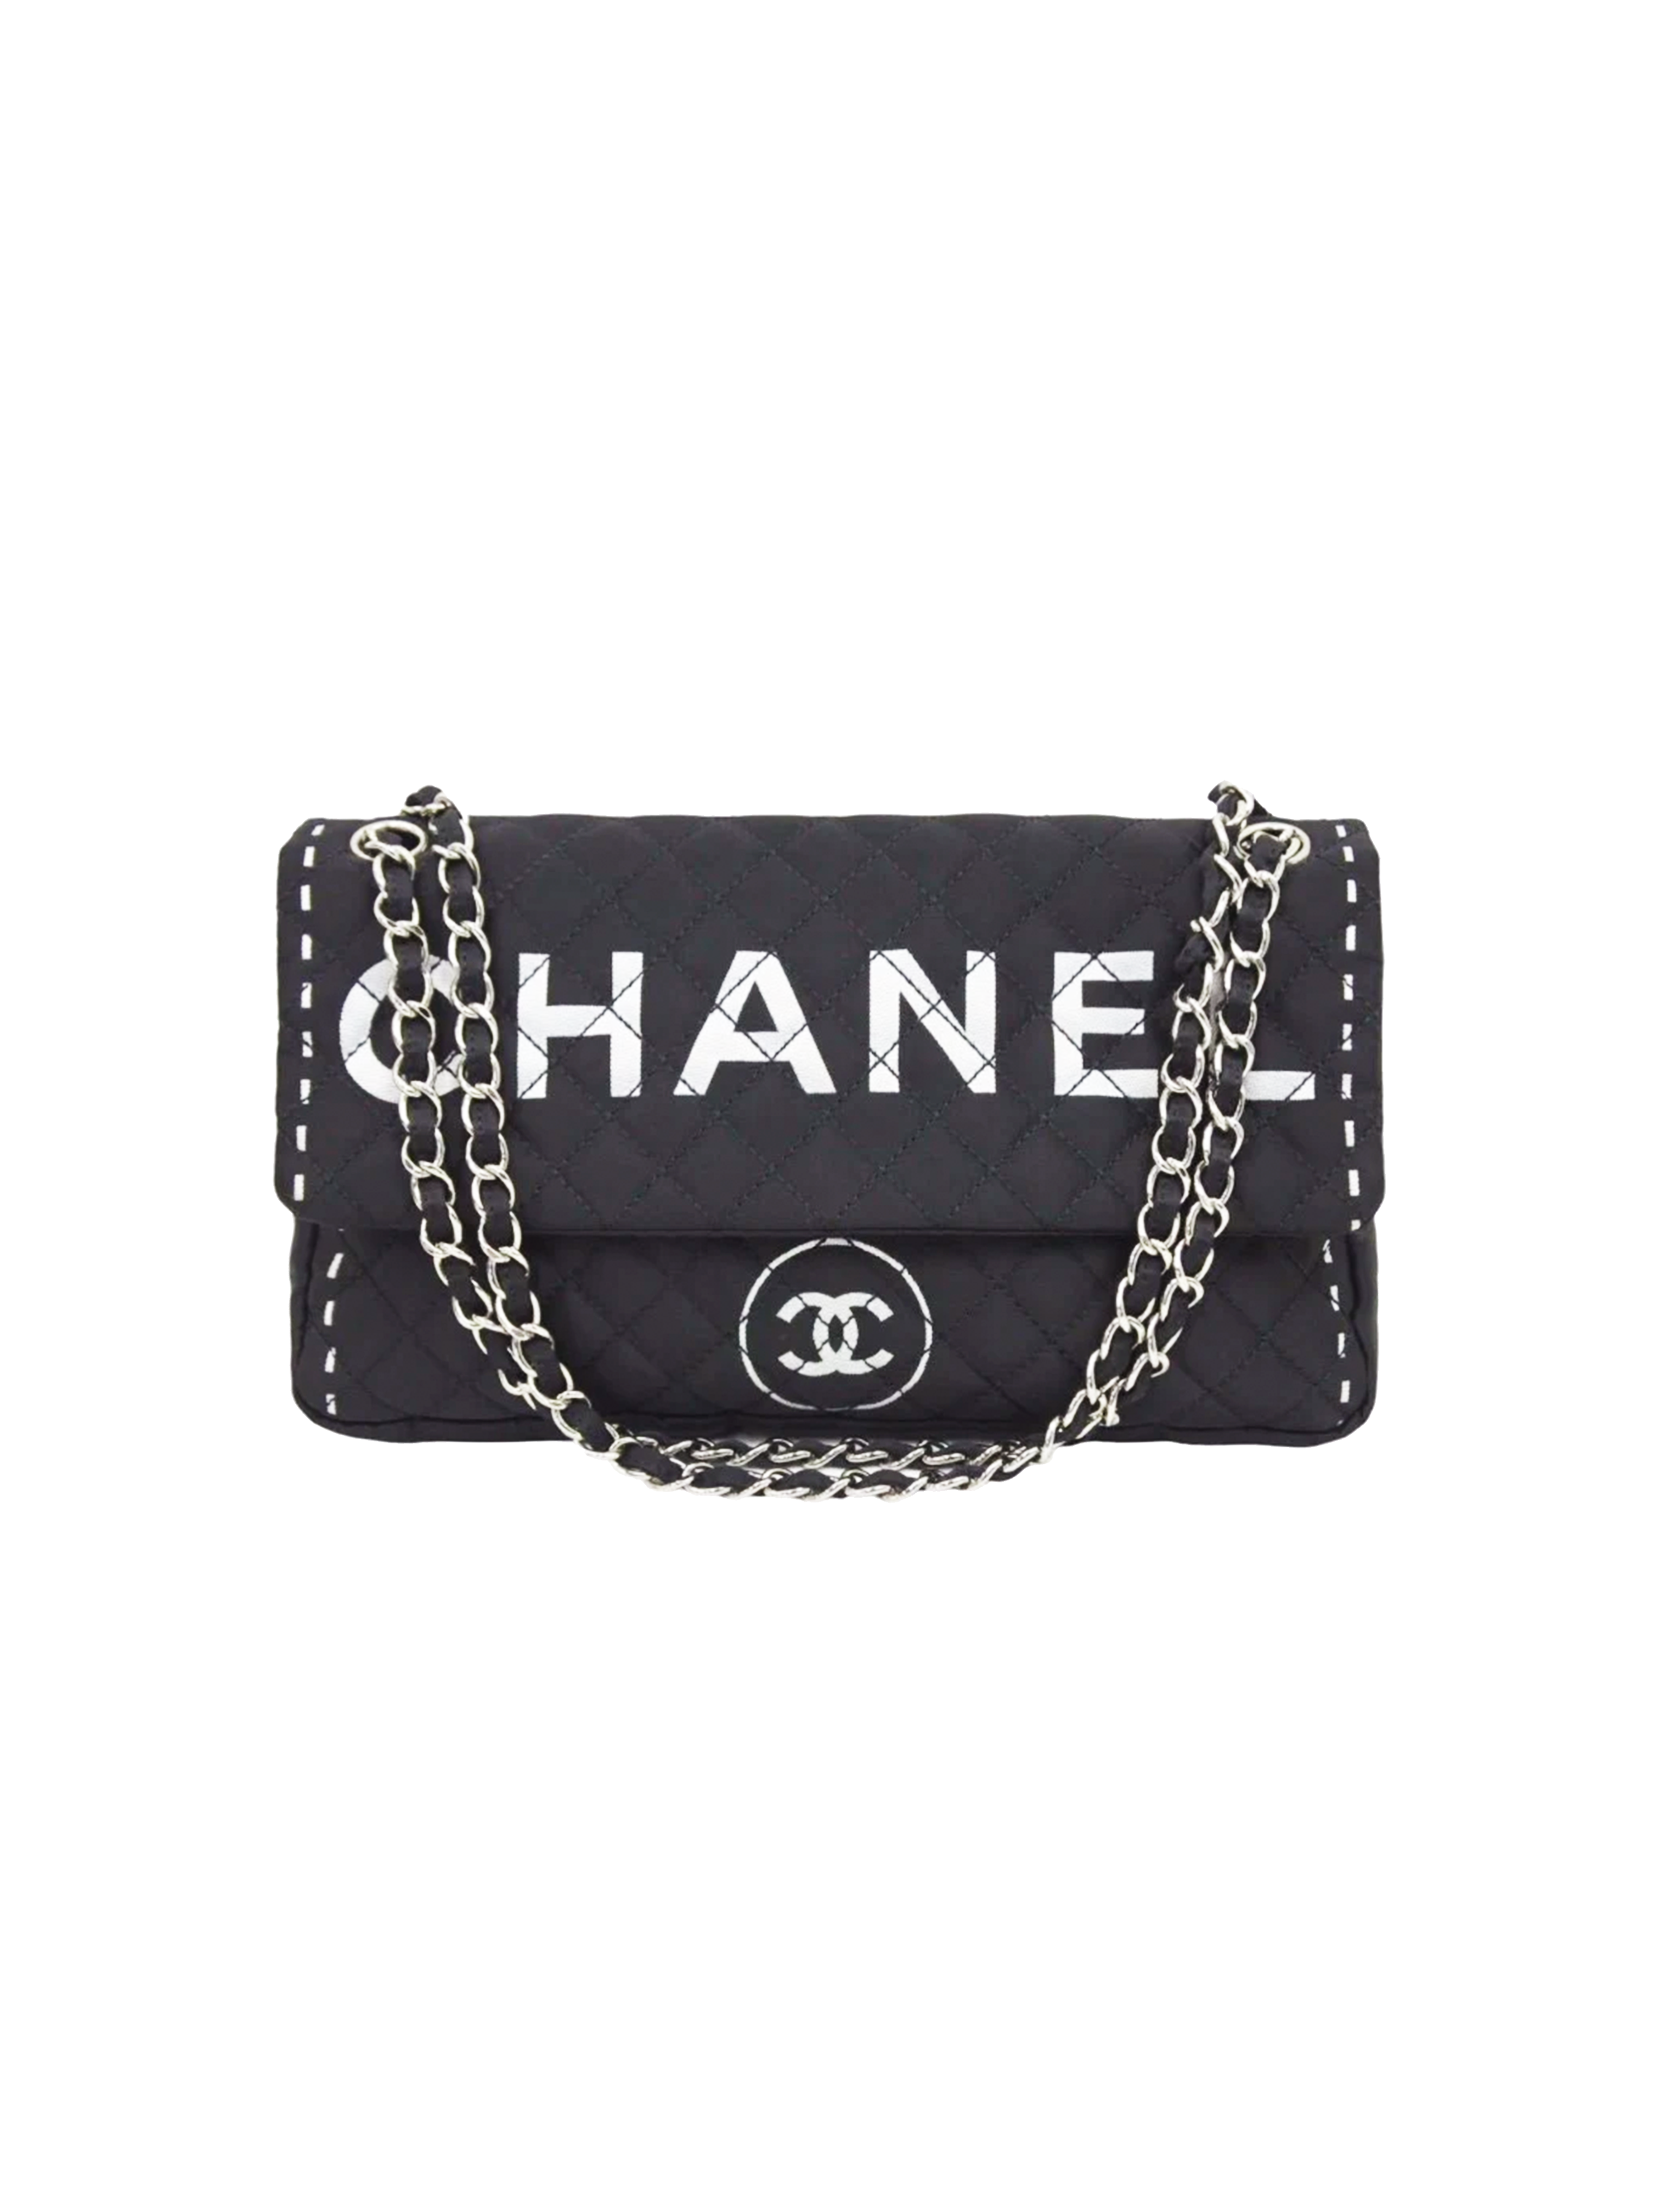 Chanel 2000s Extremely Rare Black CC Flap Bag